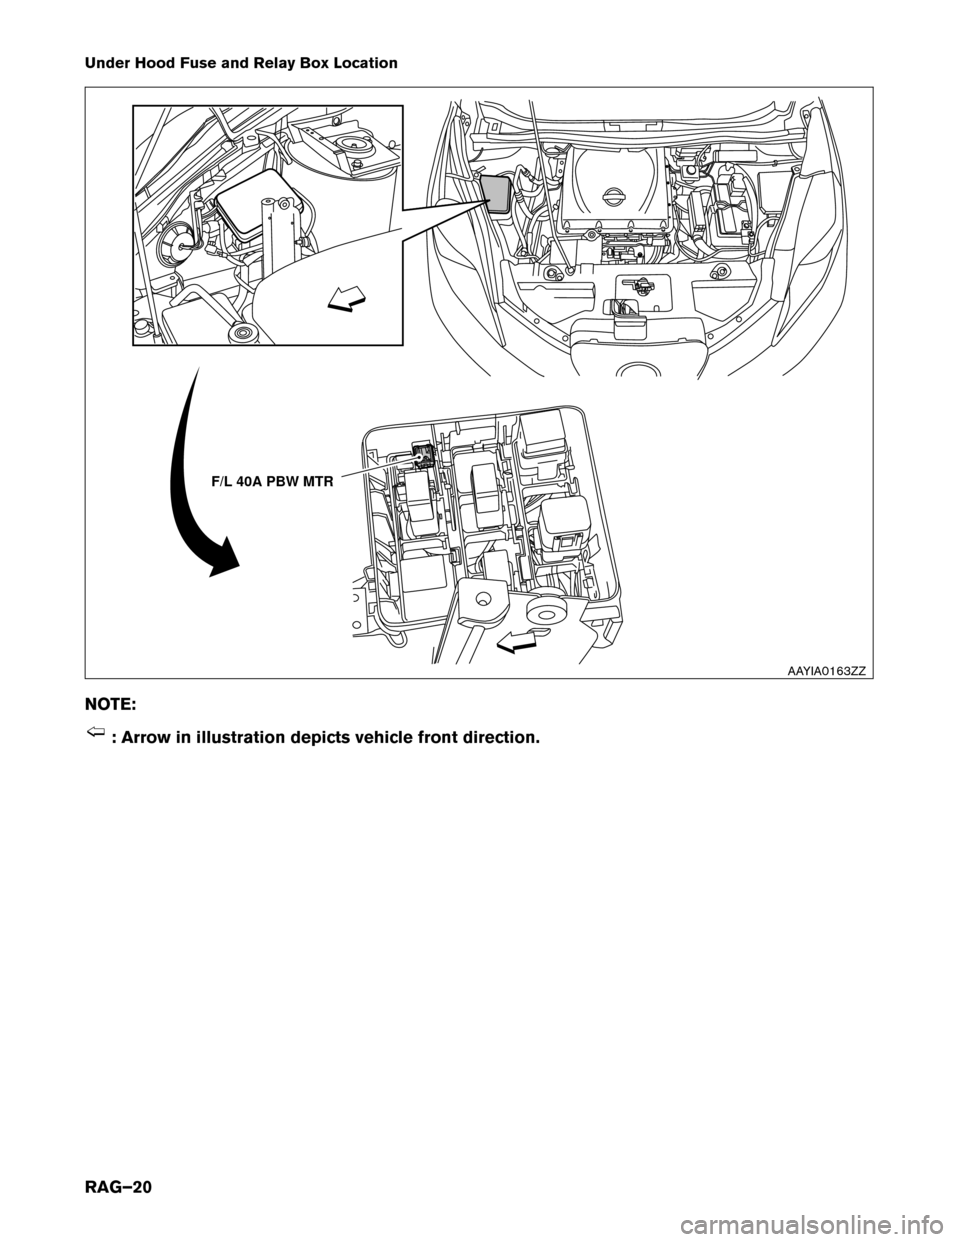 NISSAN LEAF 2015 1.G Roadside Assistance Guide Under Hood Fuse and Relay Box Location
NO
TE: : Arrow in illustration depicts vehicle front direction. F/L 40A PBW MTR
AAYIA0163ZZ
RAG–20 